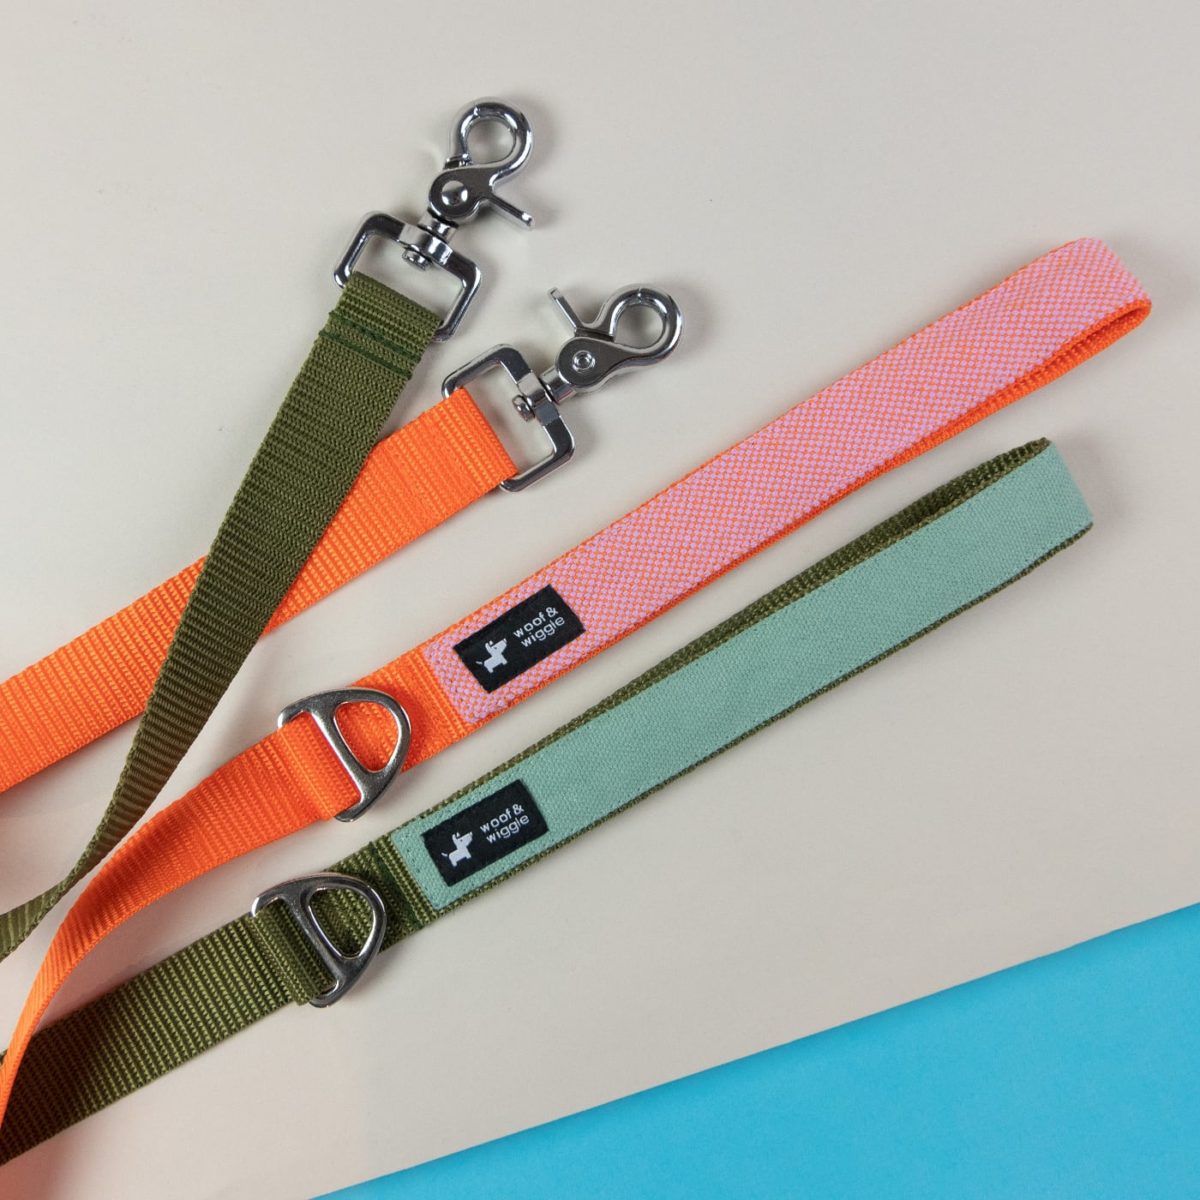 Dog leash "Vacay All Day" and "Dolce Vita"